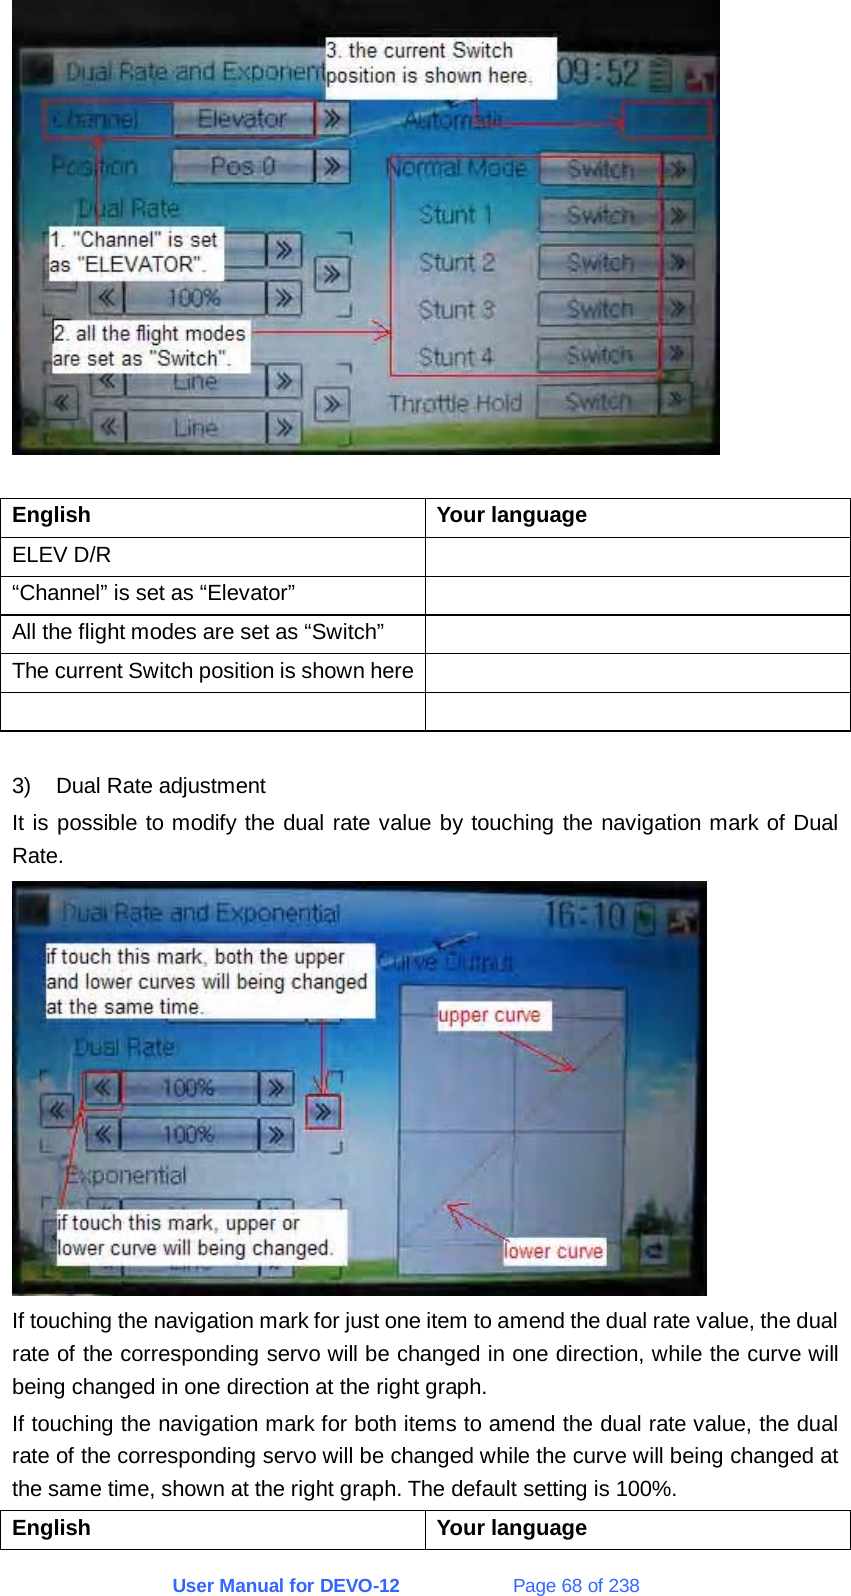 User Manual for DEVO-12             Page 68 of 238   English Your language ELEV D/R   “Channel” is set as “Elevator”   All the flight modes are set as “Switch”   The current Switch position is shown here     3)  Dual Rate adjustment It is possible to modify the dual rate value by touching the navigation mark of Dual Rate.  If touching the navigation mark for just one item to amend the dual rate value, the dual rate of the corresponding servo will be changed in one direction, while the curve will being changed in one direction at the right graph. If touching the navigation mark for both items to amend the dual rate value, the dual rate of the corresponding servo will be changed while the curve will being changed at the same time, shown at the right graph. The default setting is 100%. English Your language 